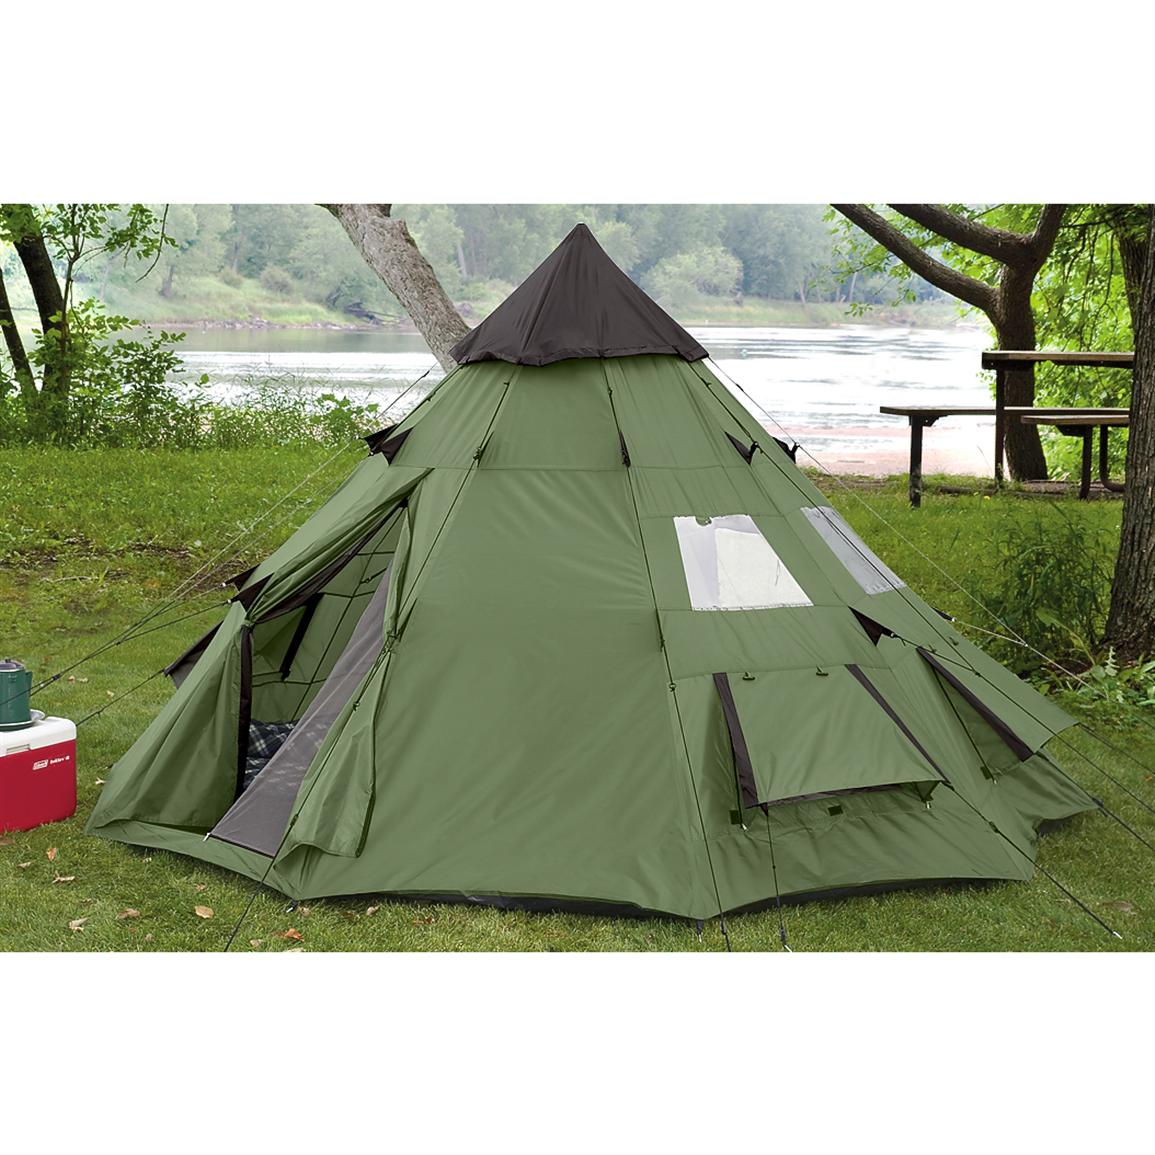  Tent 1039; x 1039;  175418, Outfitter amp; Canvas Tents at Sportsma